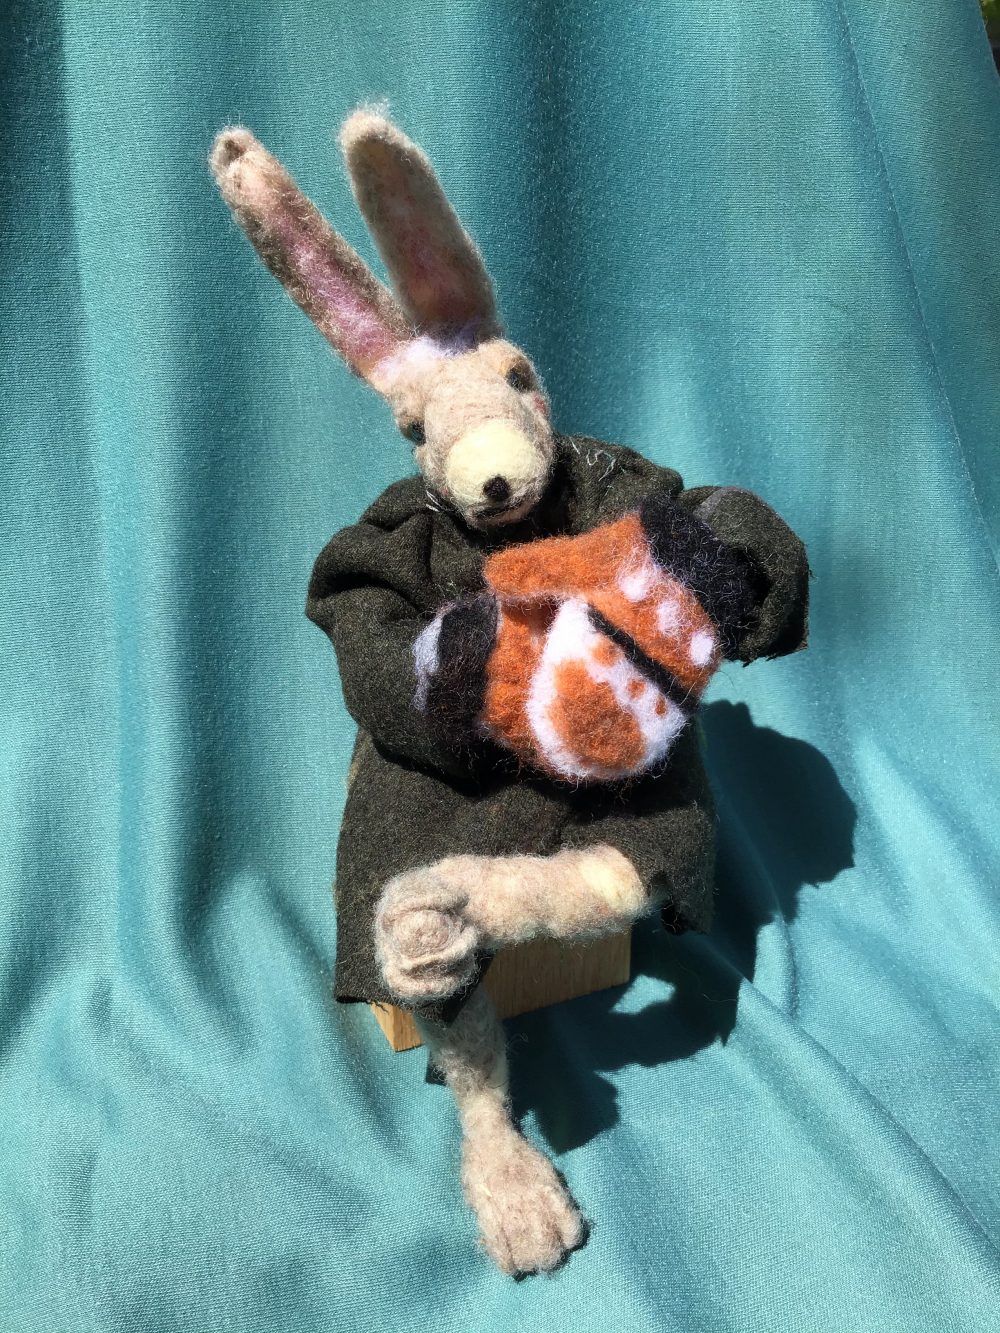 This is a bunny figure made of wool felt sitting down with mittens and a jacket.